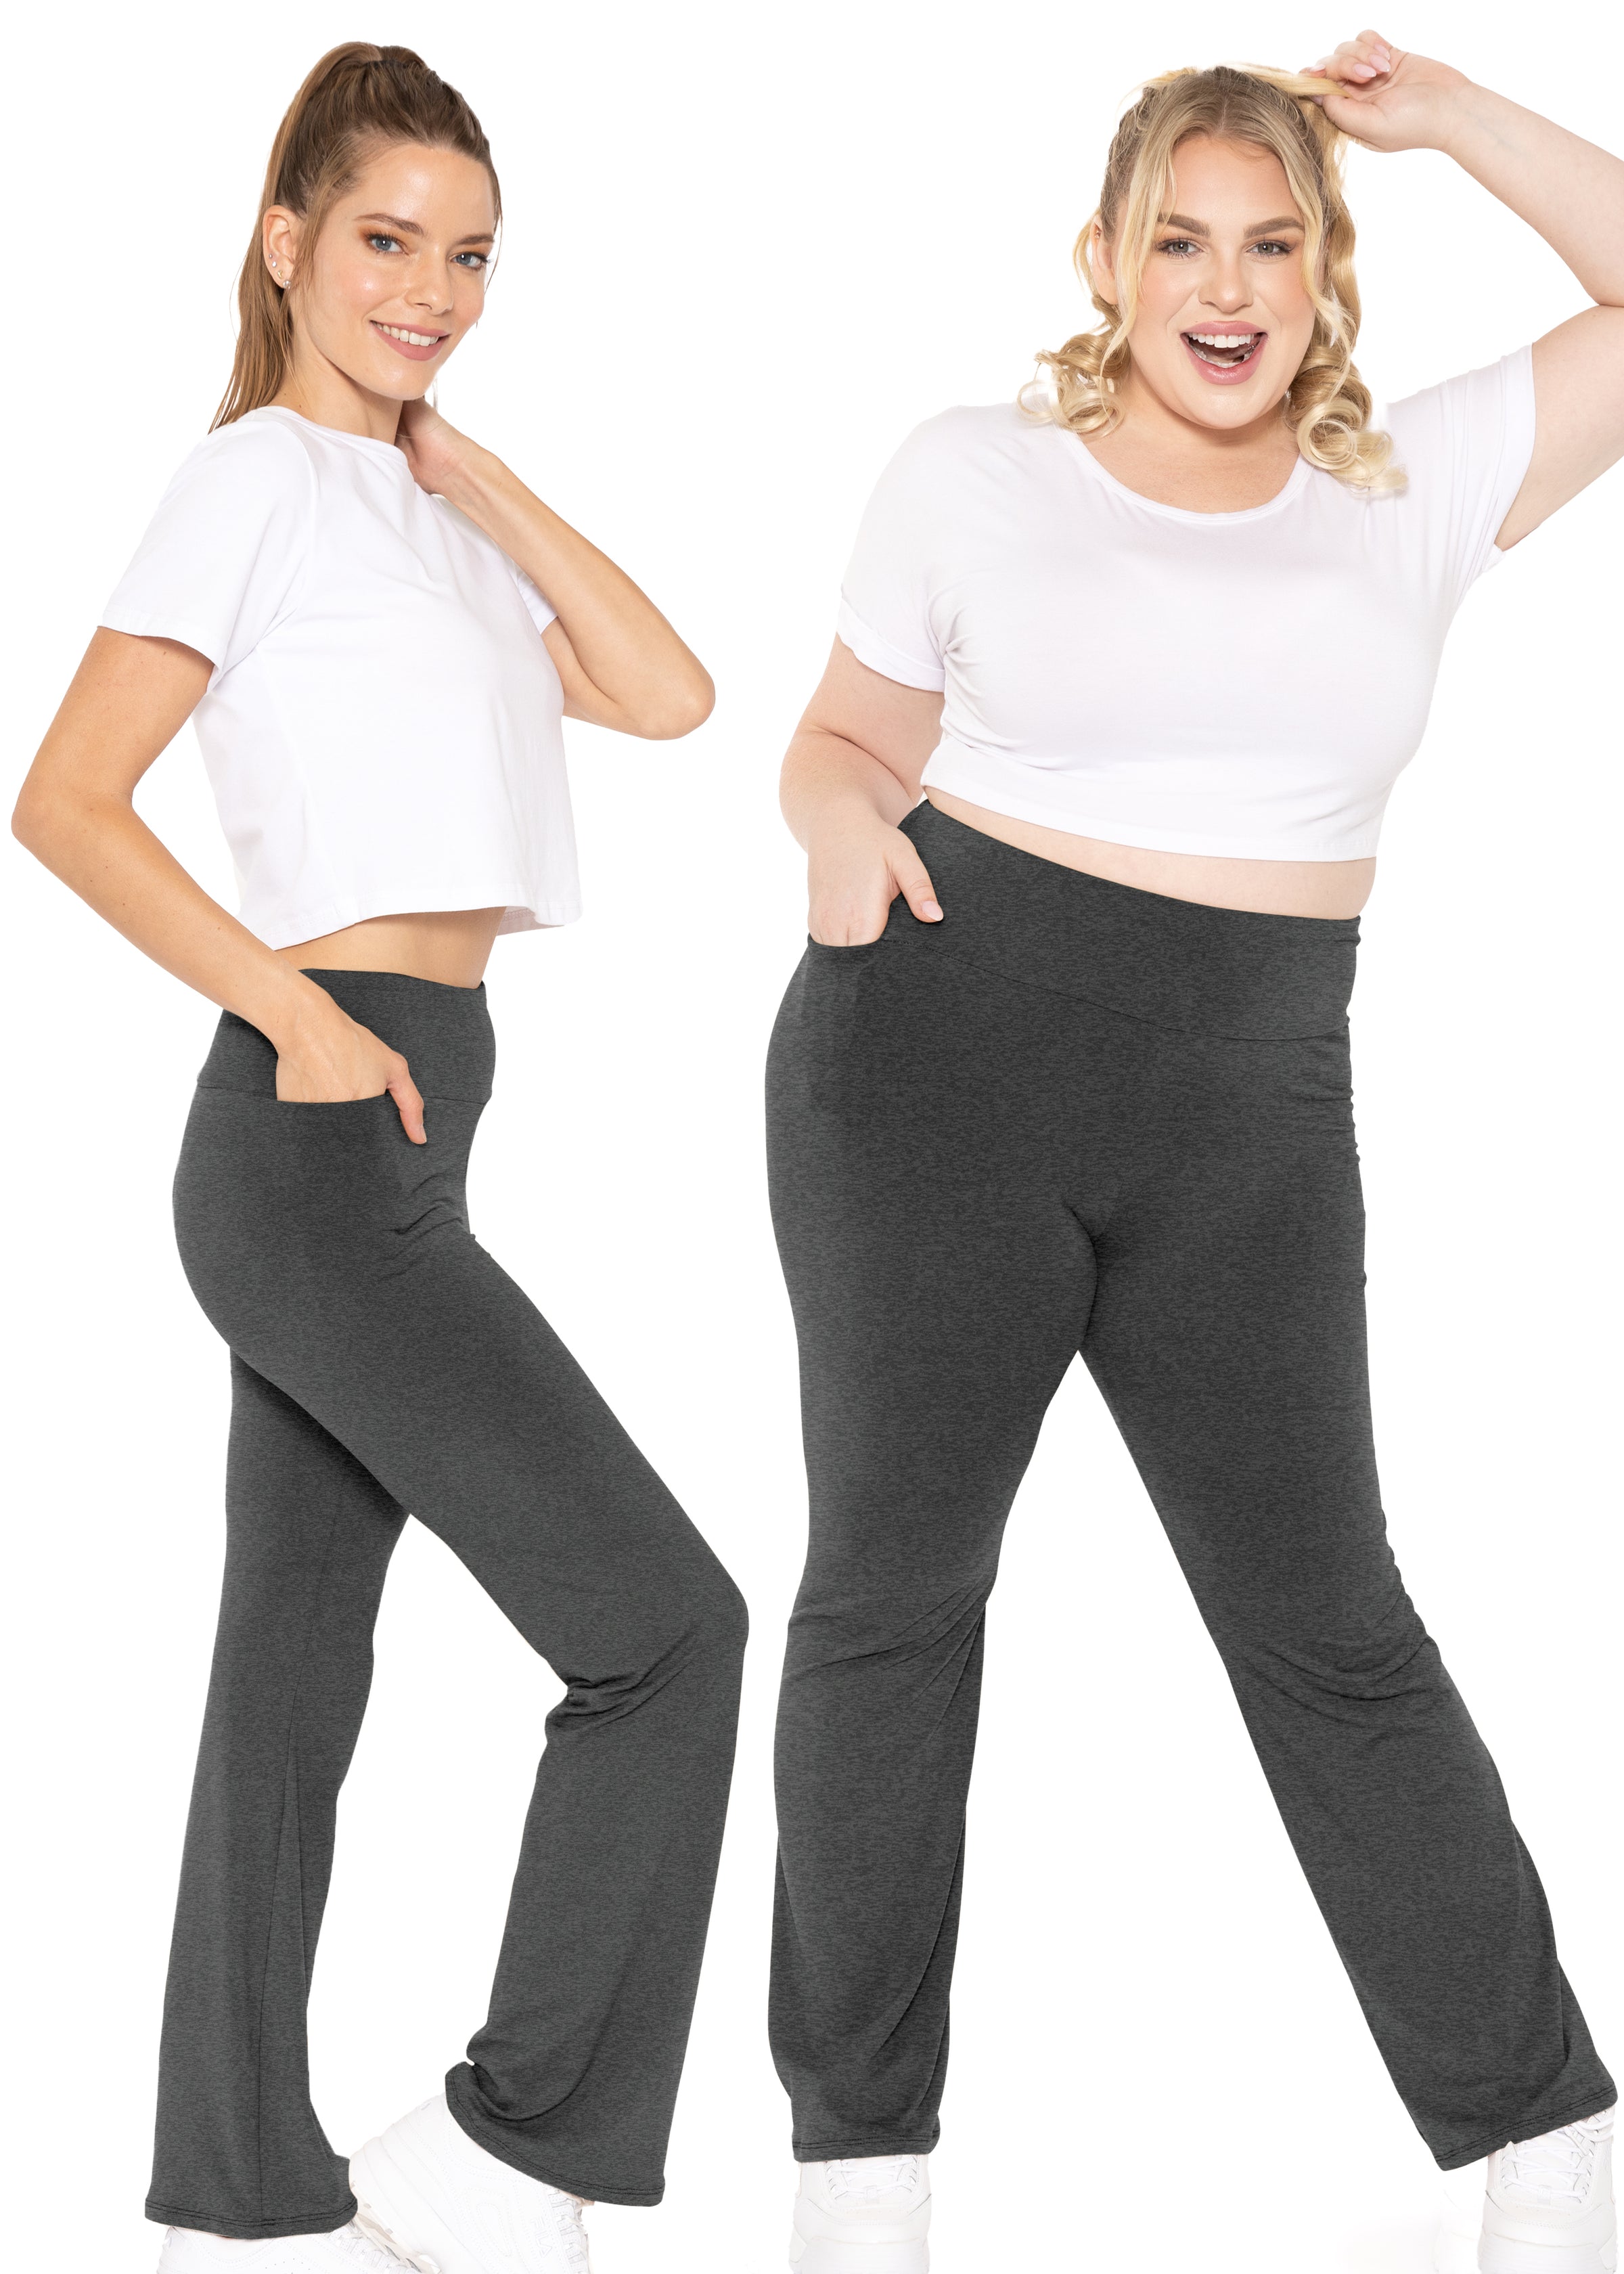  SOOTHFIT Yoga Pants for Women with Pockets High Waist